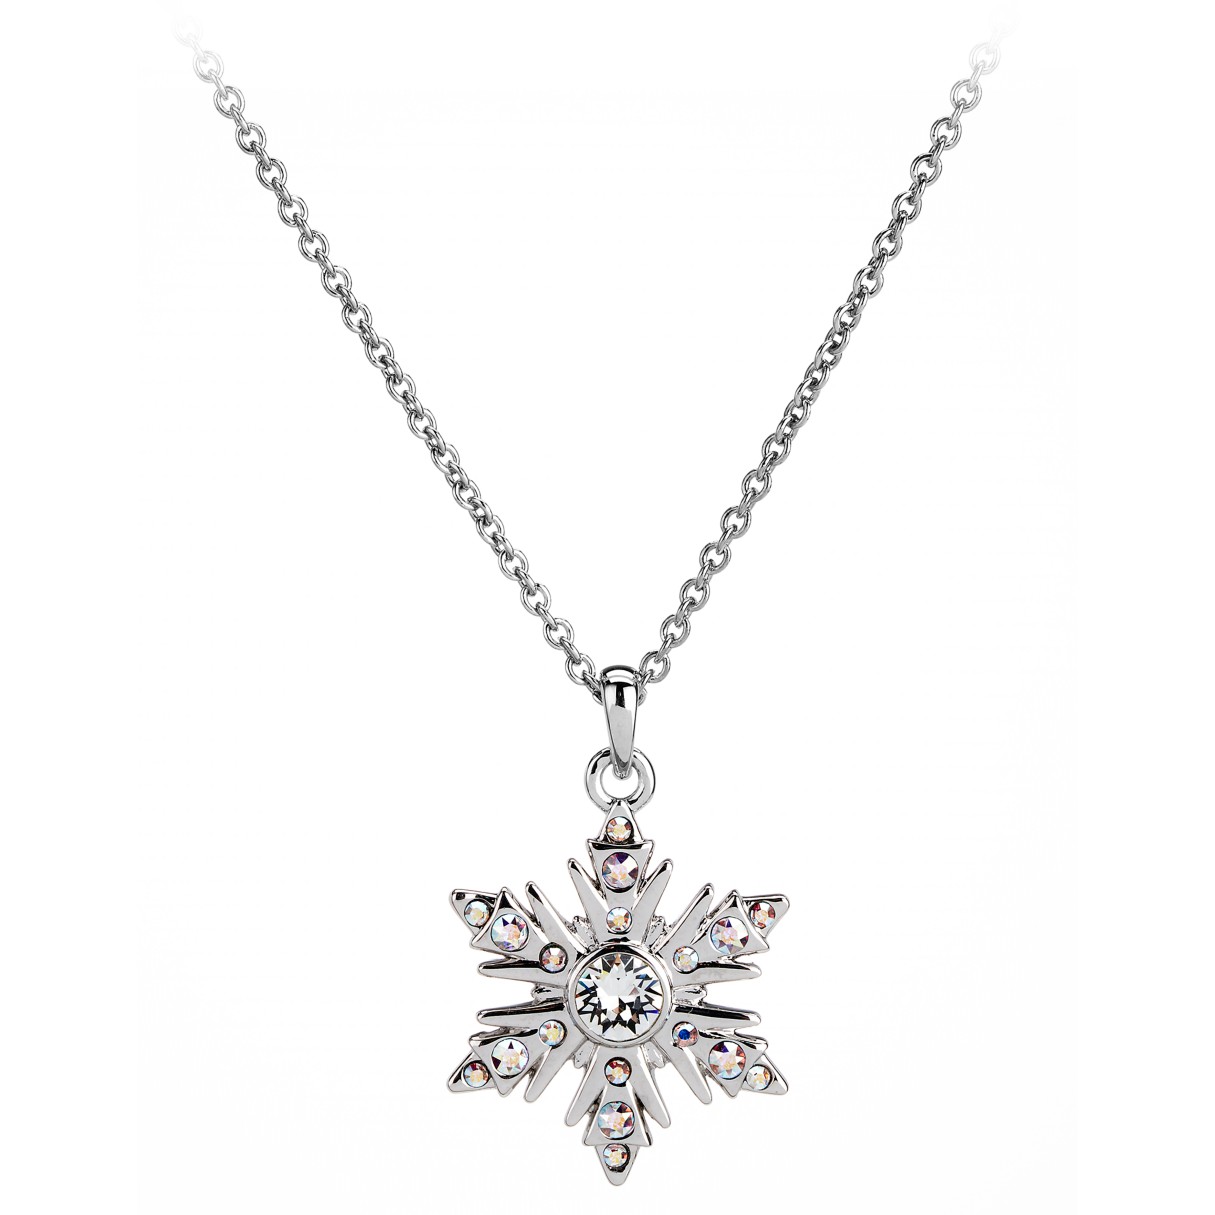 Frozen Snowflake Necklace by Arribas